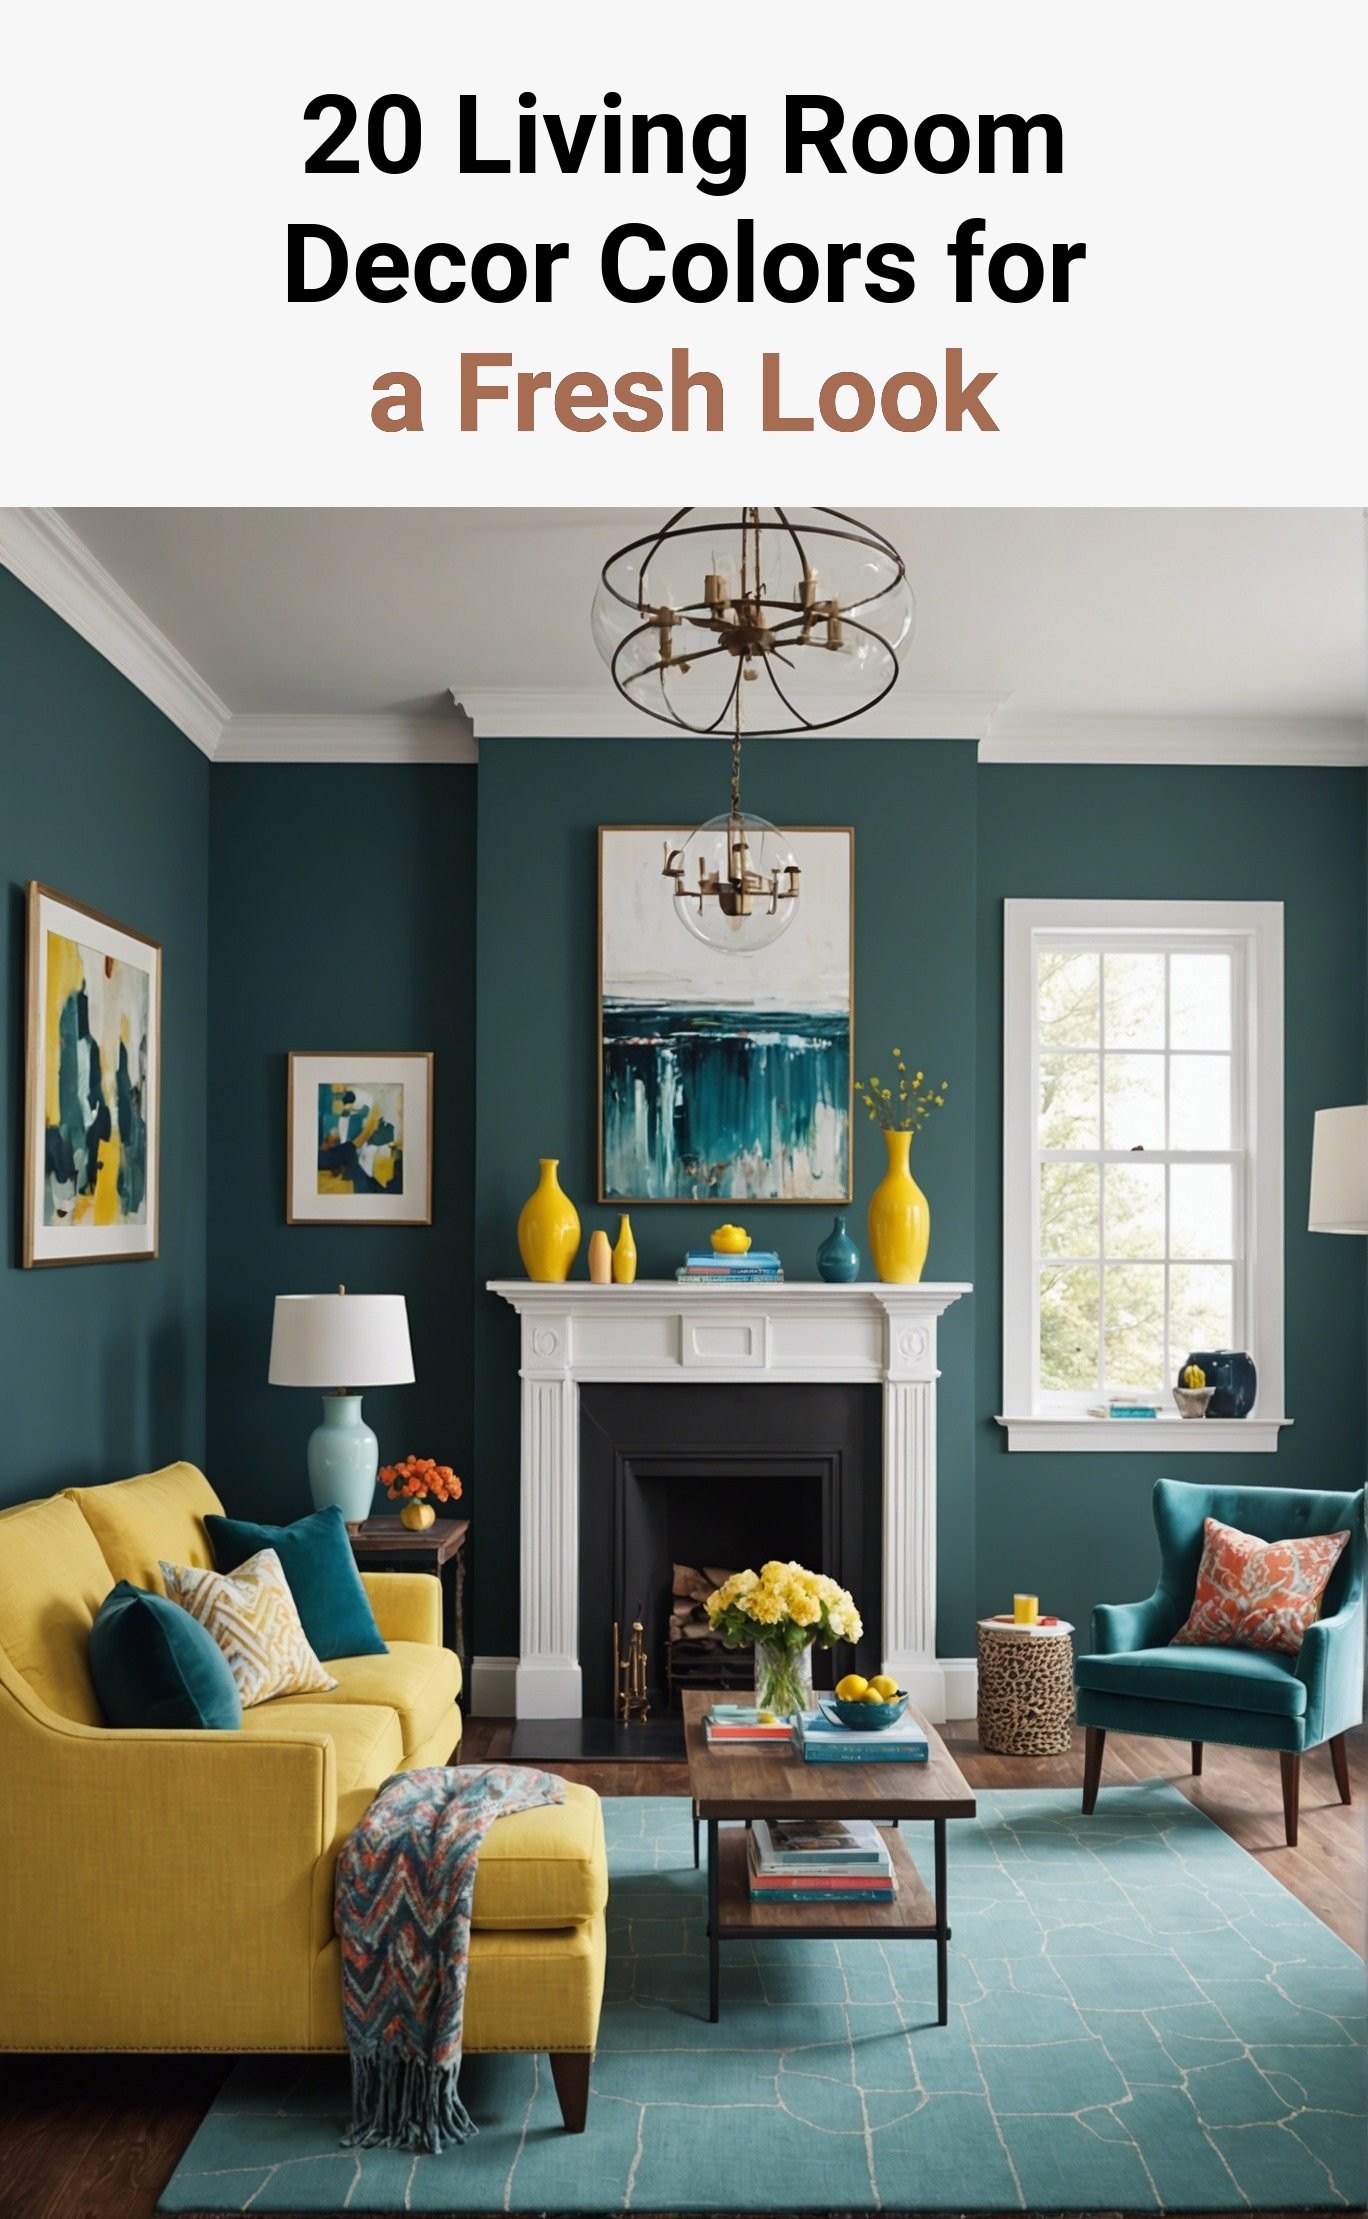 20 Living Room Decor Colors for a Fresh Look